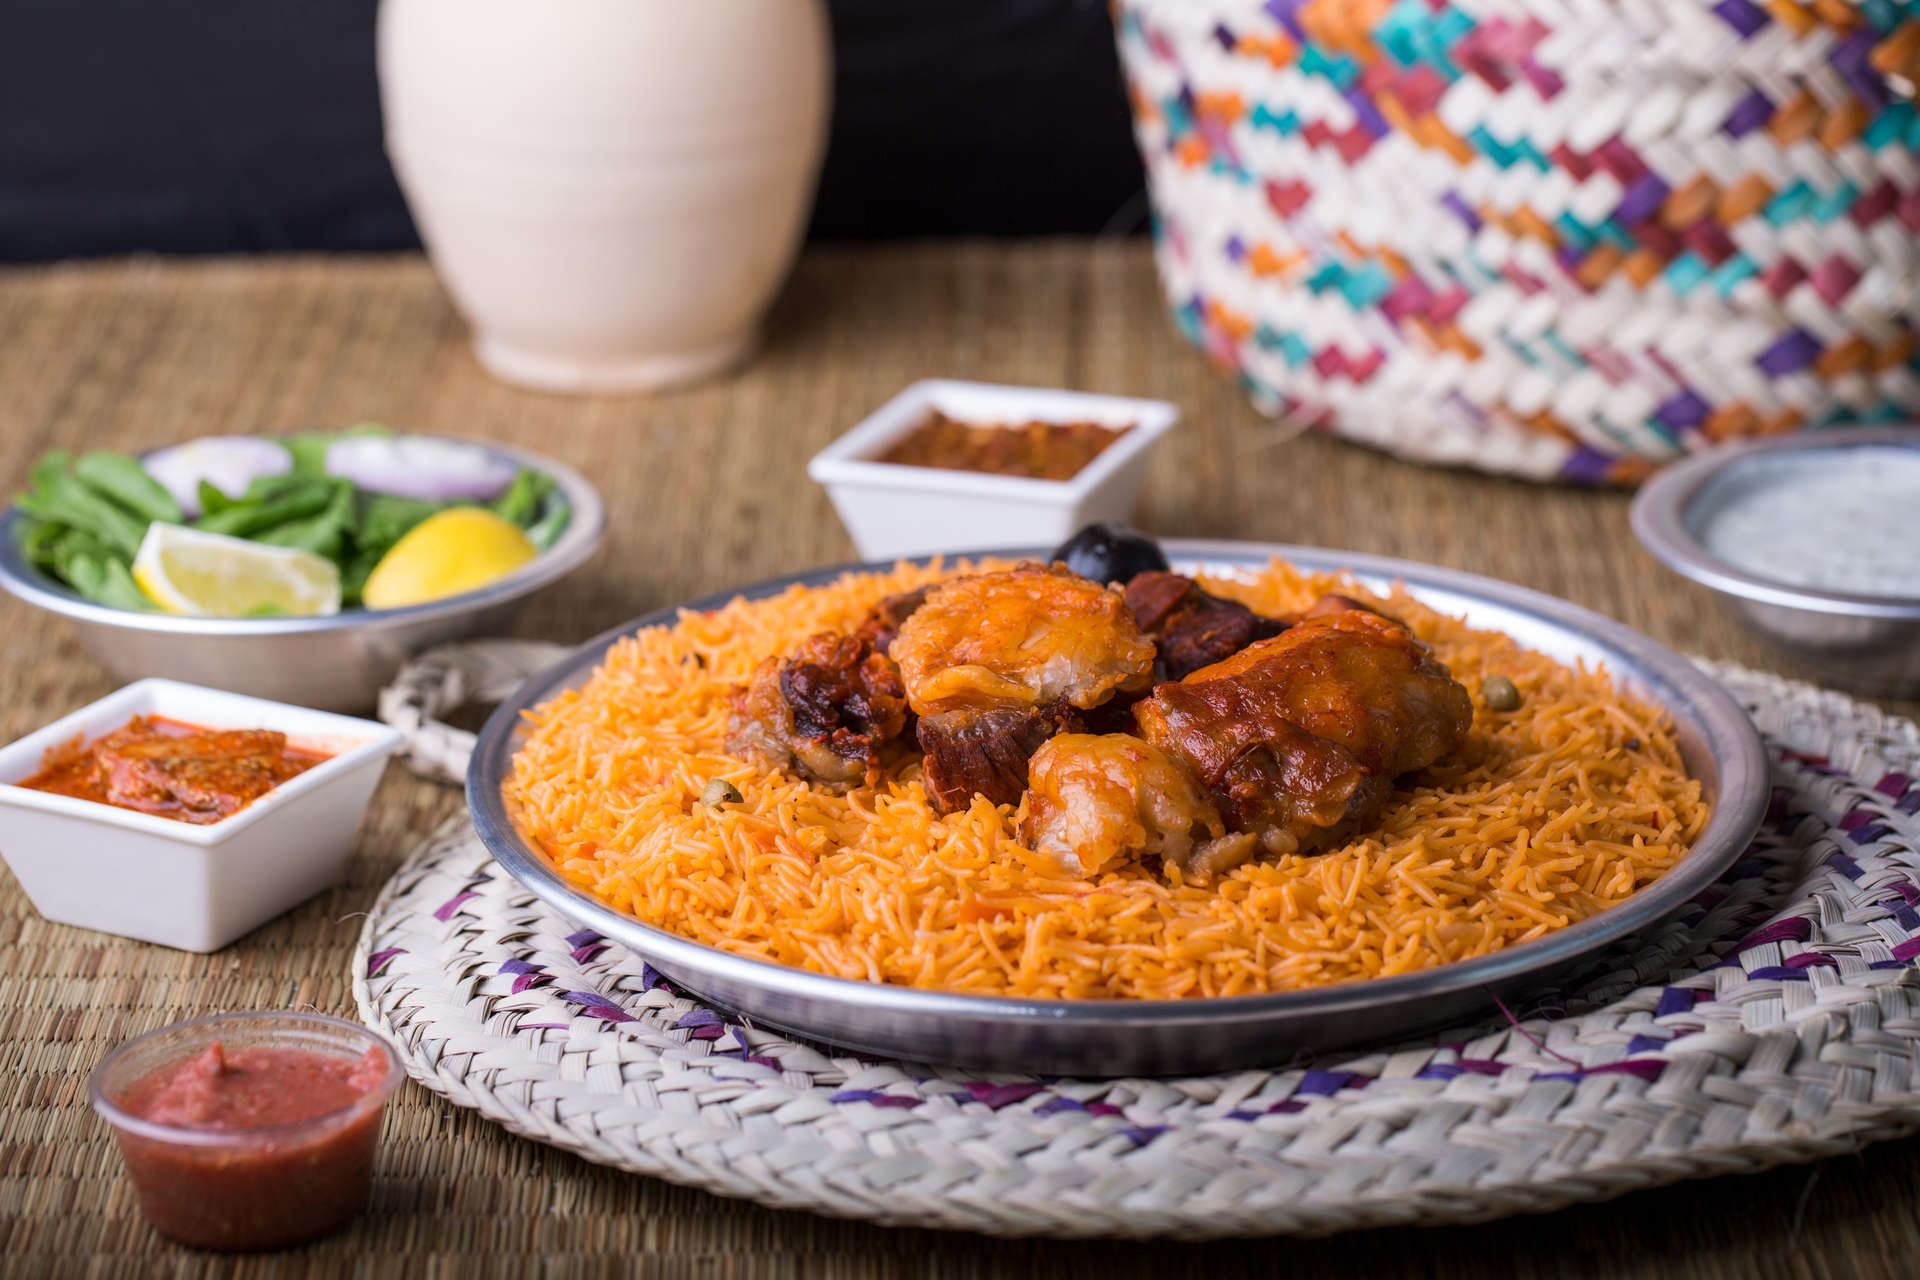 One unmissable dish to try when in Kuwait is machboos, a delicately spiced rice and meat dish